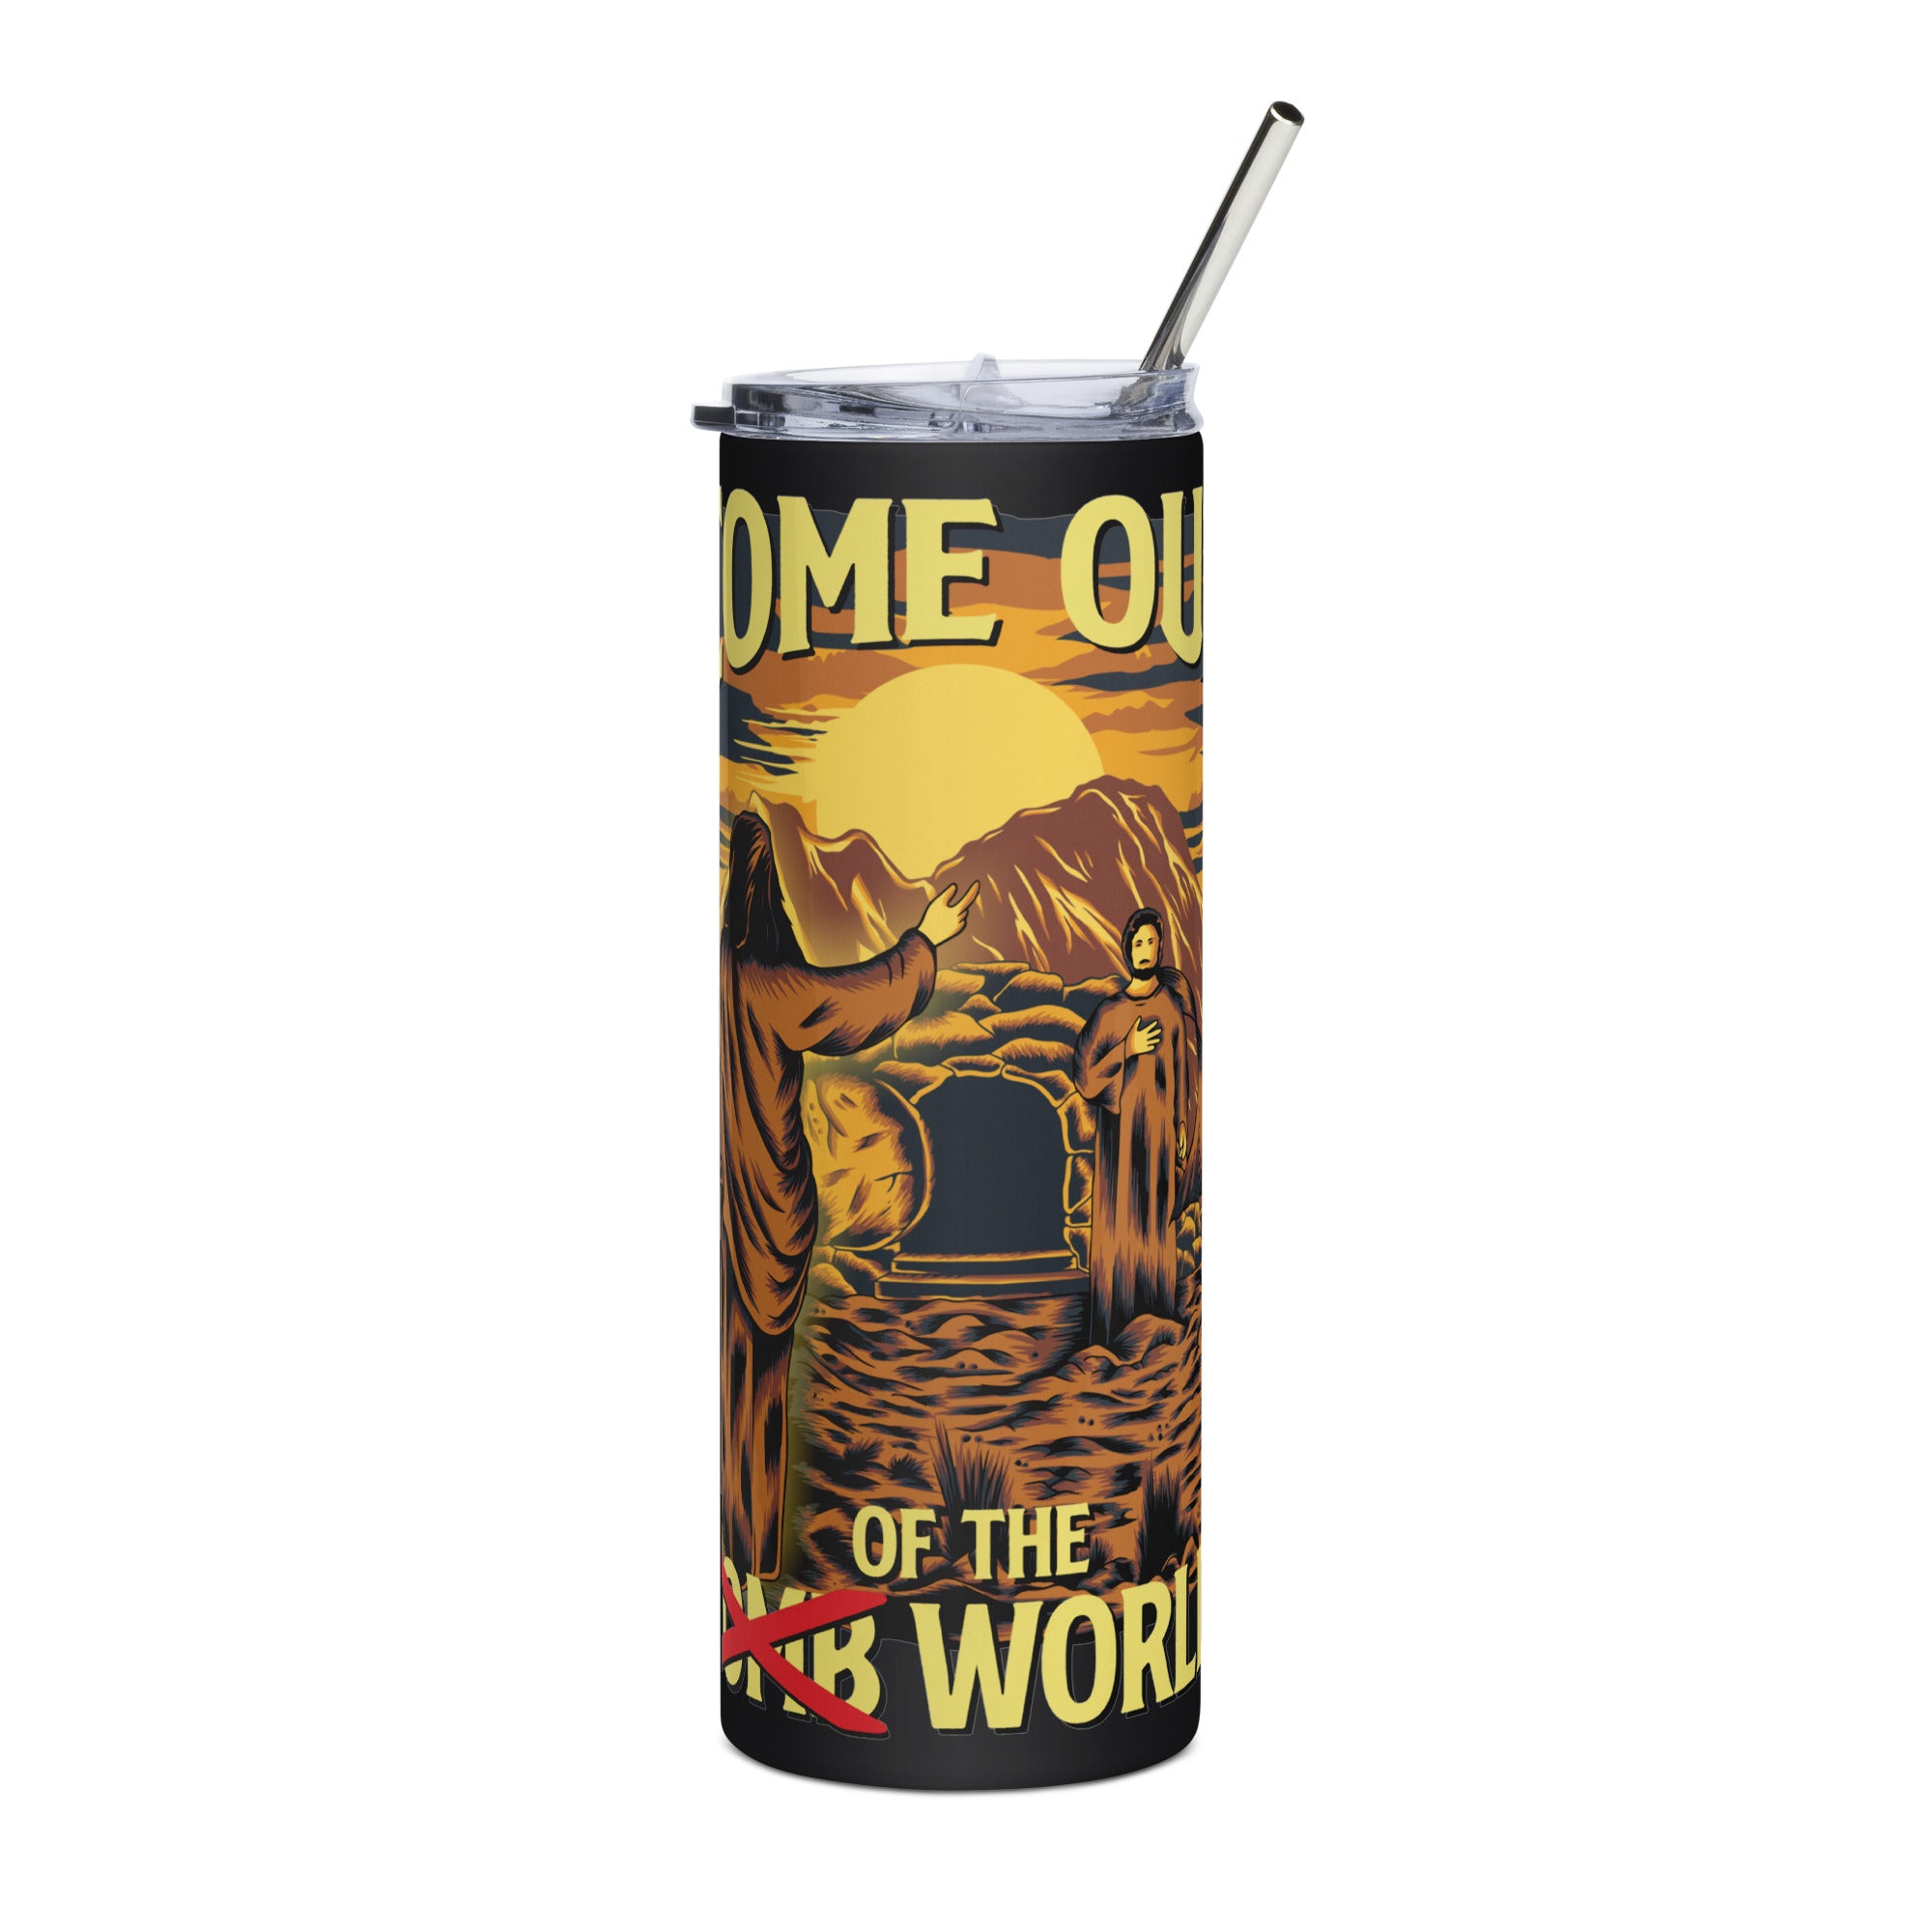 COME OUT OF THE WORLD TUMBLER